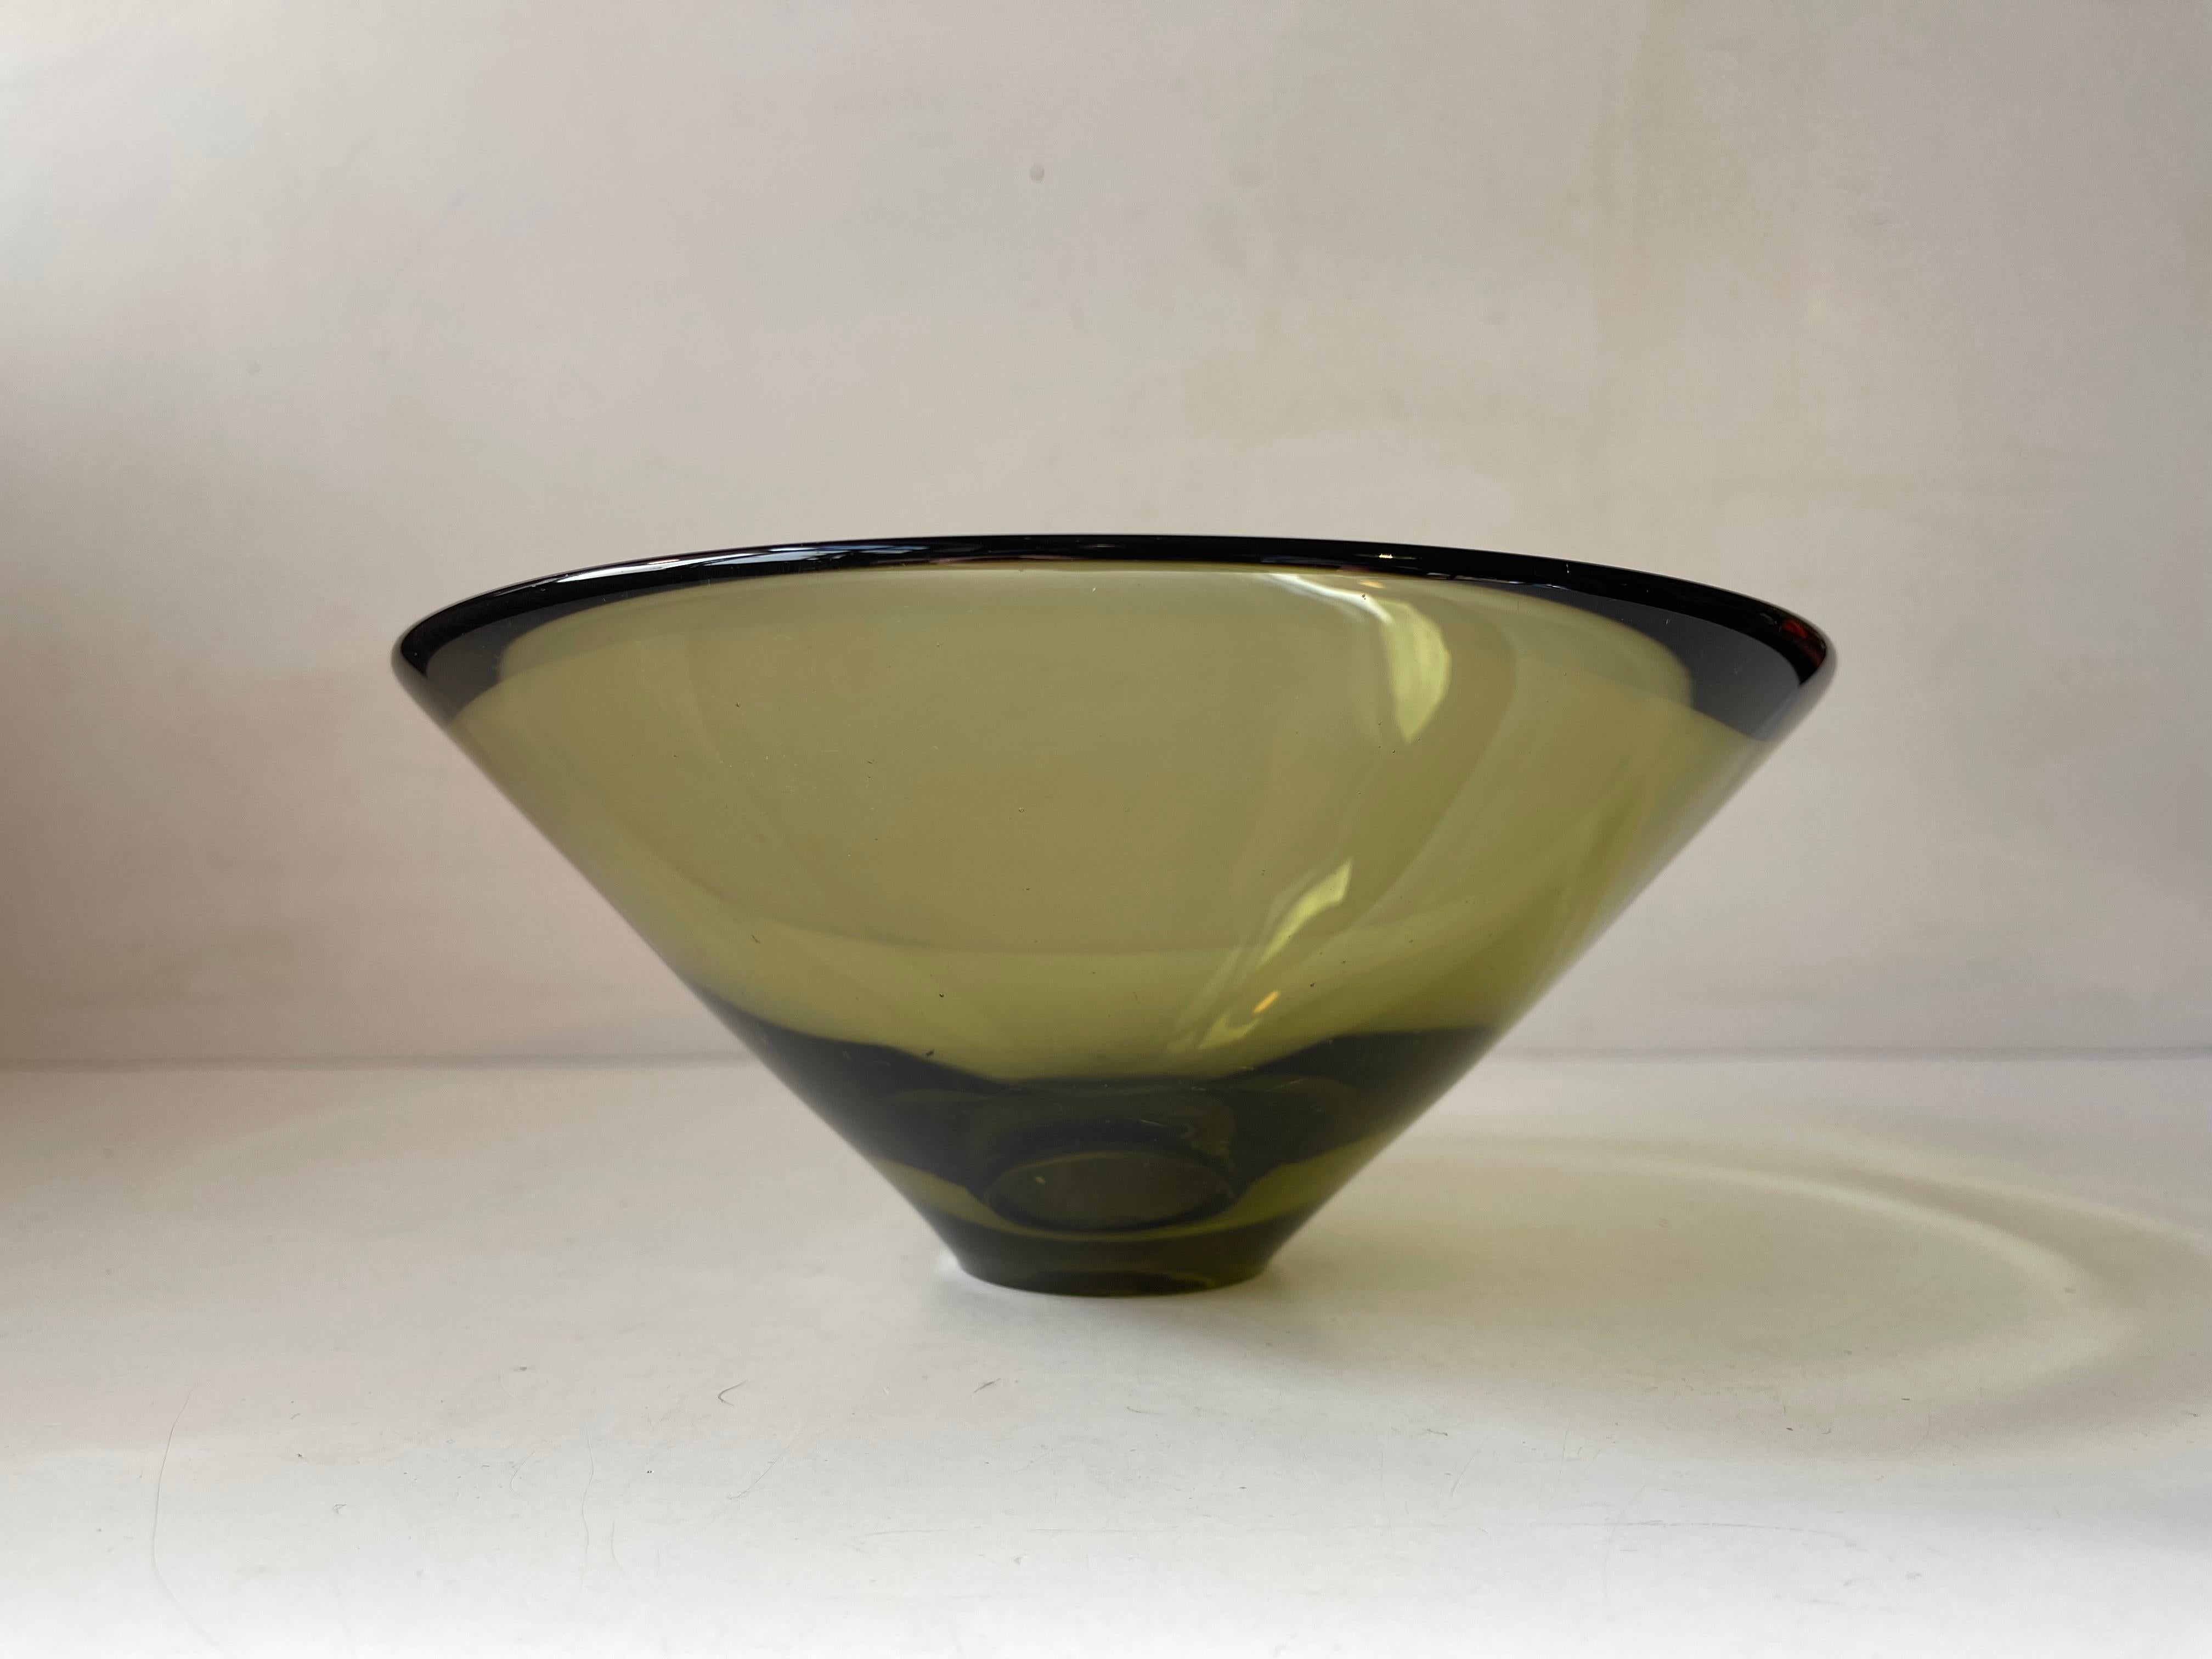 Titled 'Disko' this ultra rare olive green hand-blown glass bowl by Per Lütken was made in 1959. The name Disko has nothing to do with disco. In fact the name was inspired by the reflections of light Lütken experienced visiting Diskobugten/ Disko